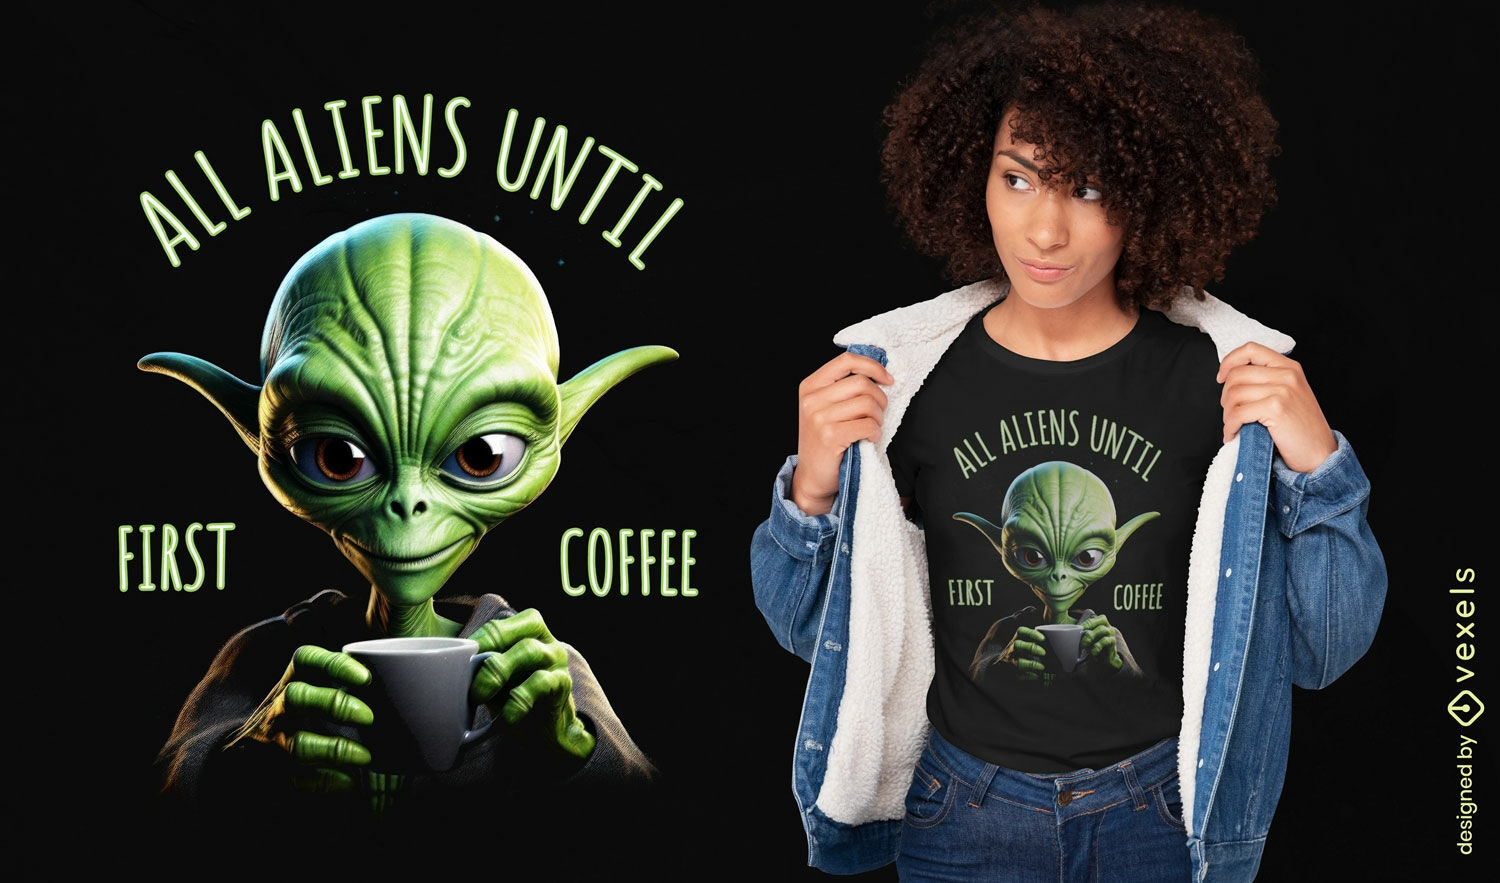 All aliens until first coffee t-shirt design